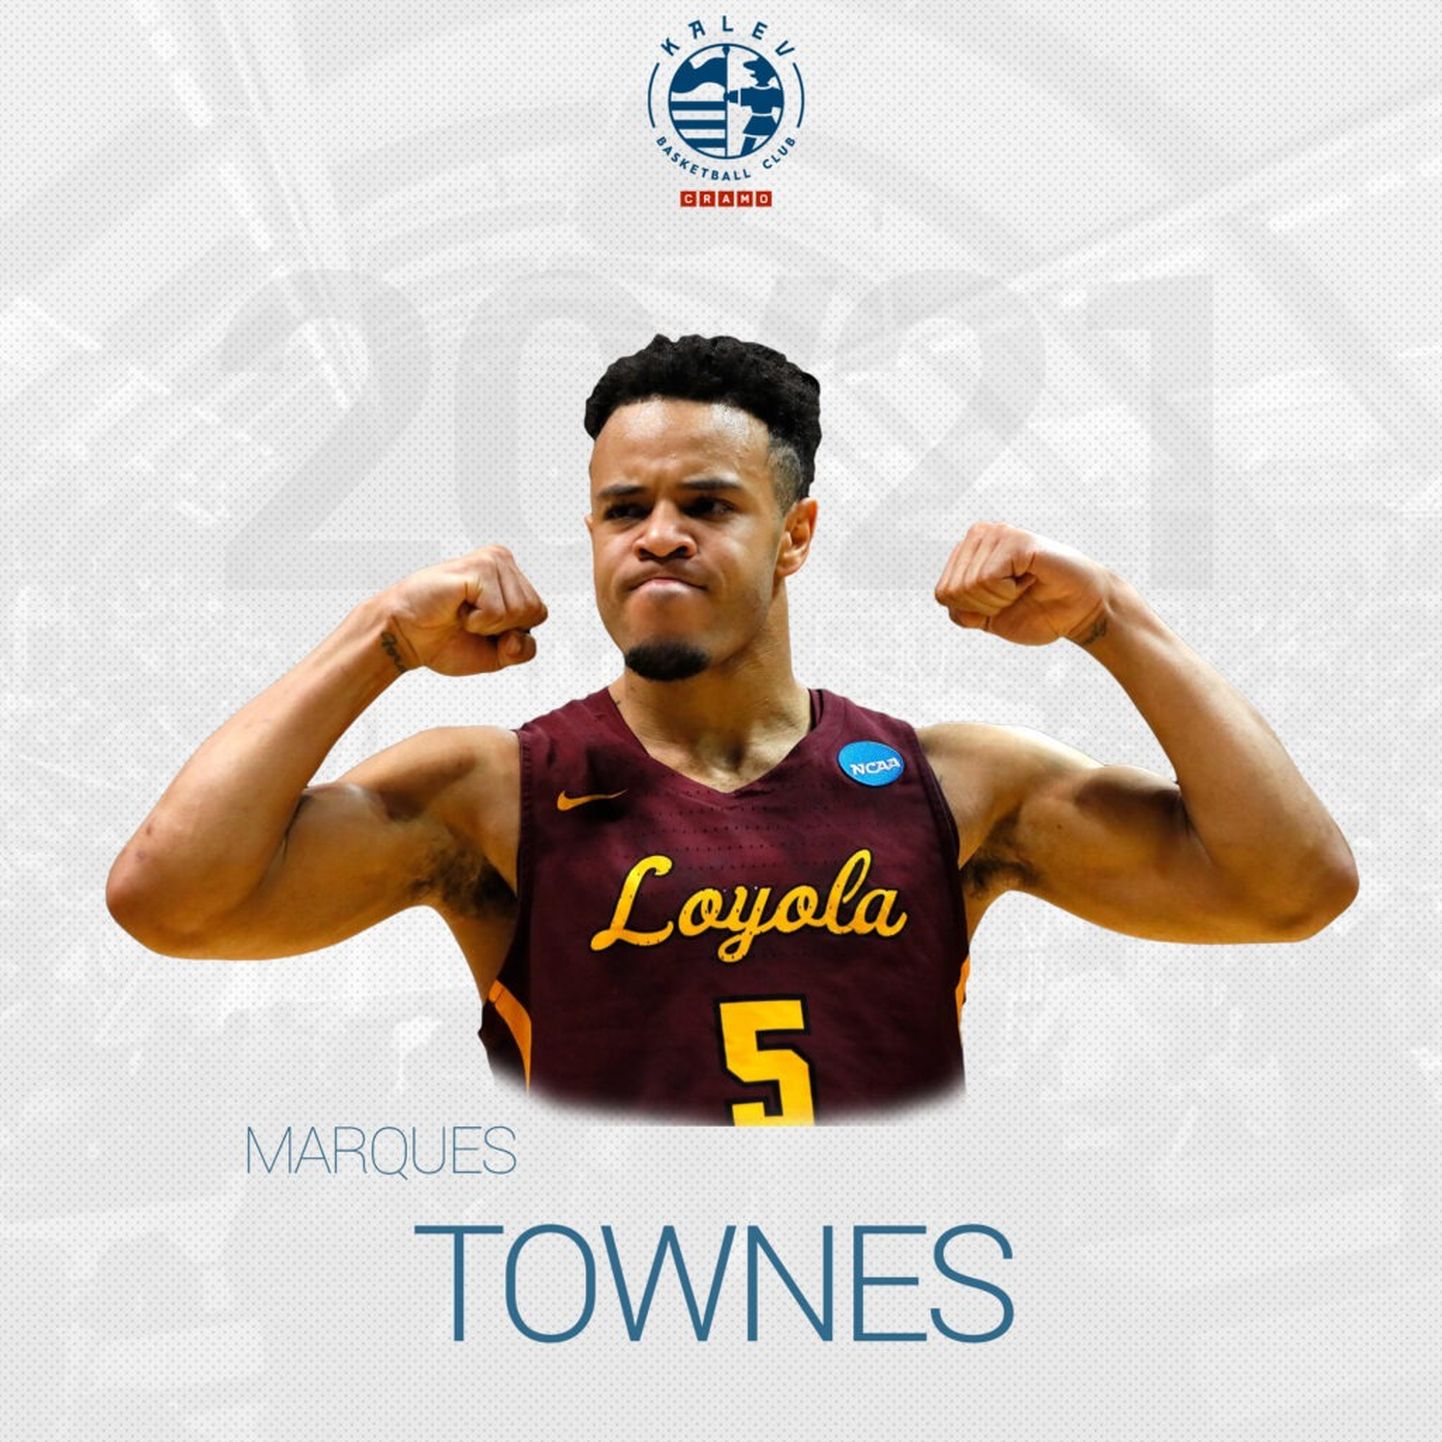 Marques Townes.